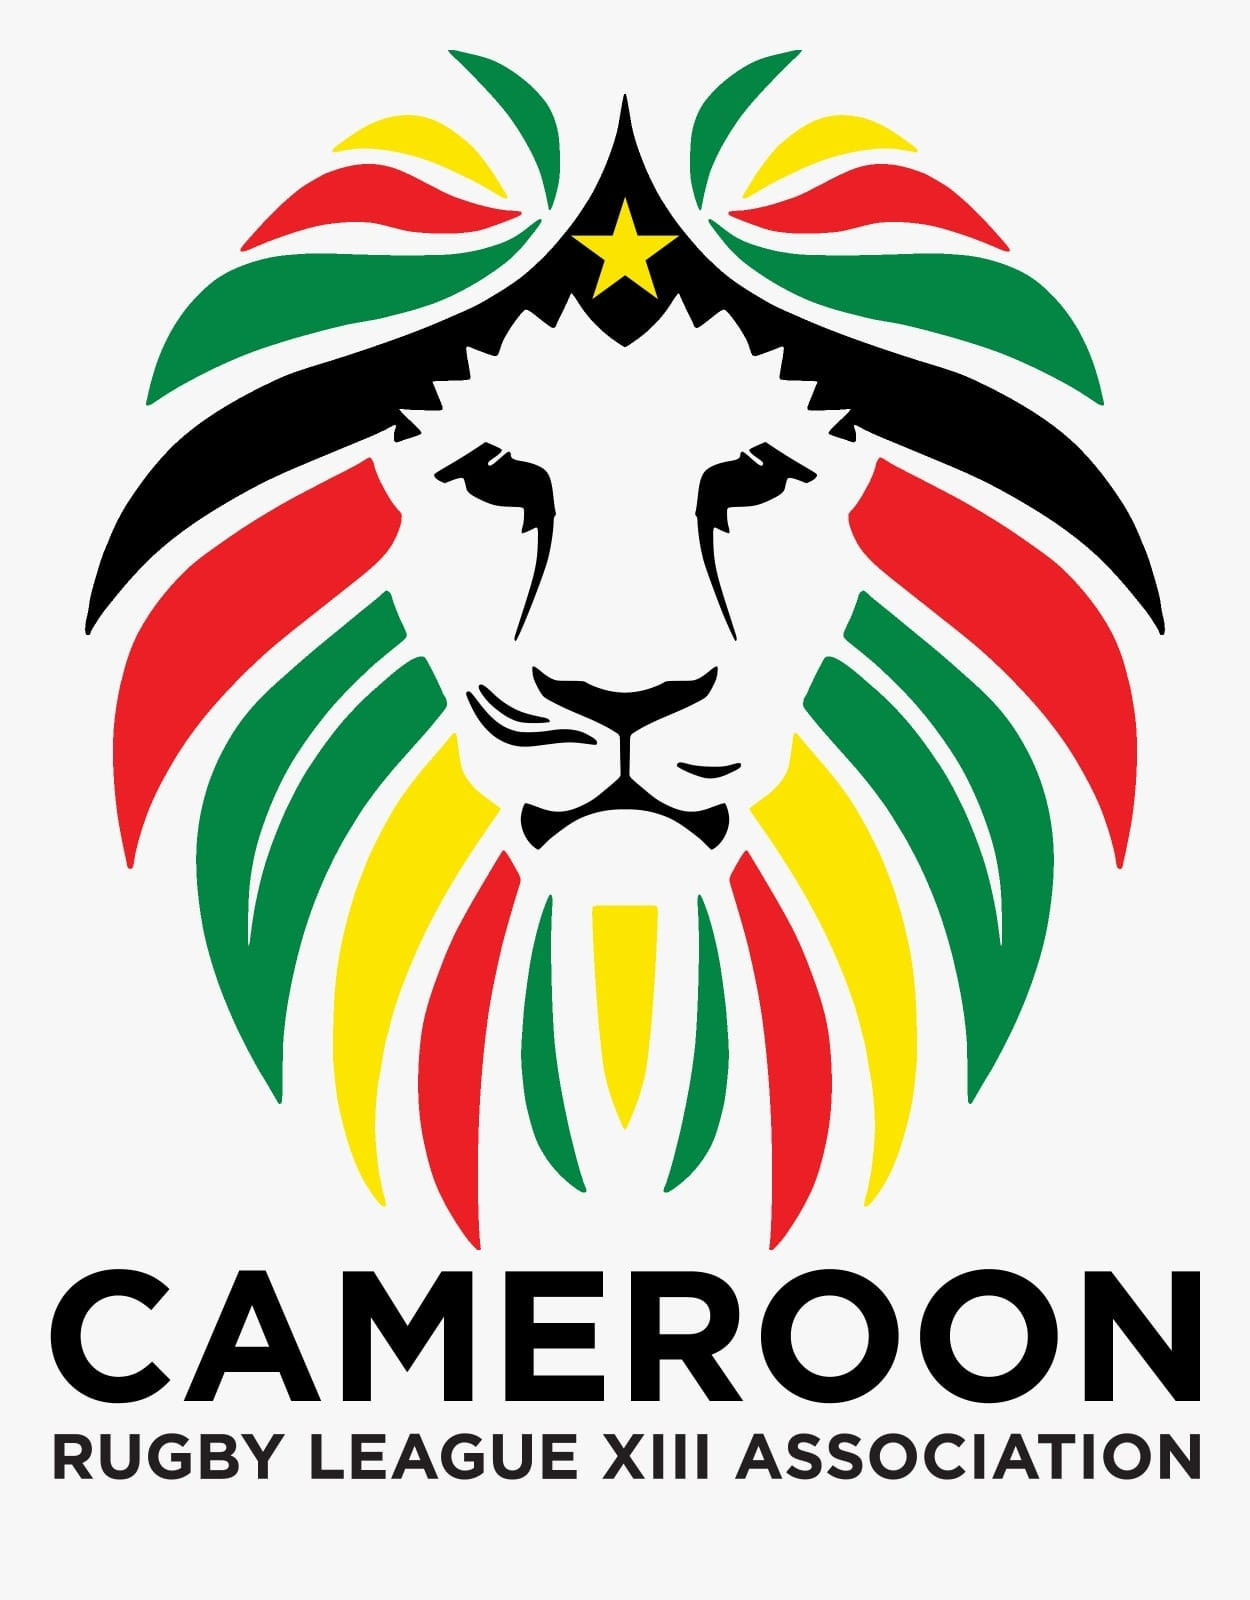 Cameroon is set to become an affiliate member of International Rugby League ©CRLXIII